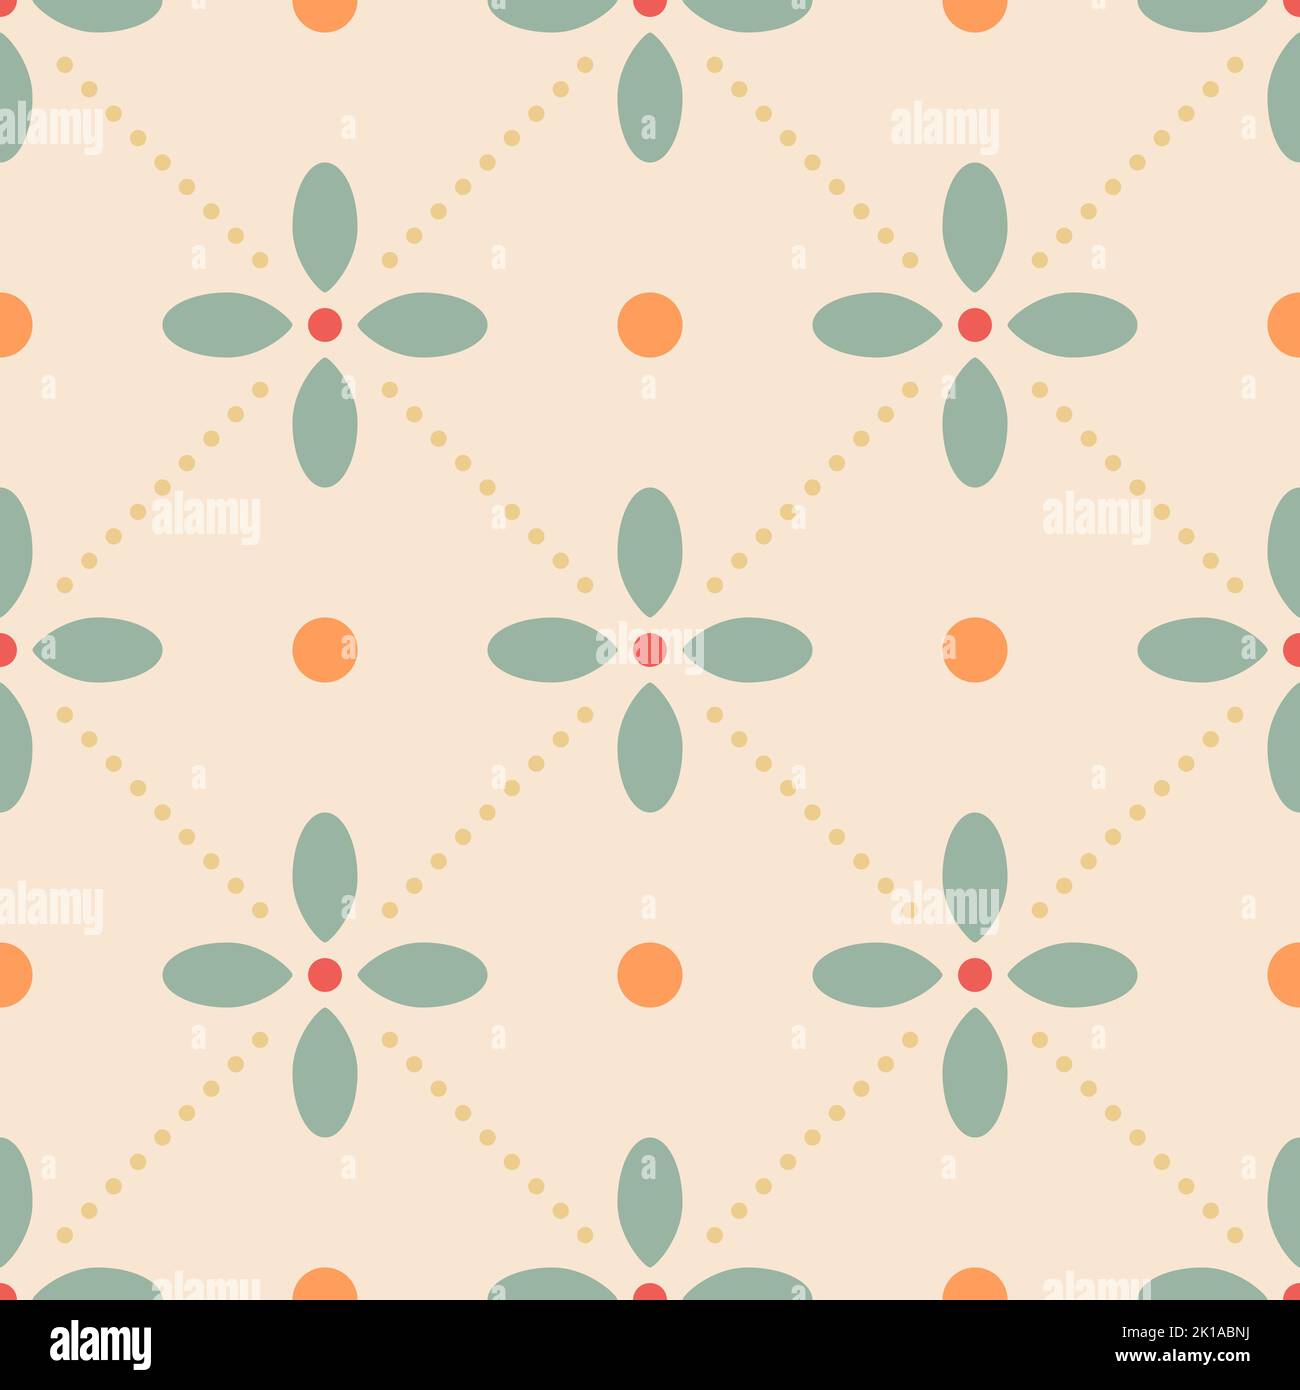 Vintage Wallpaper Fabric, Wallpaper and Home Decor | Spoonflower